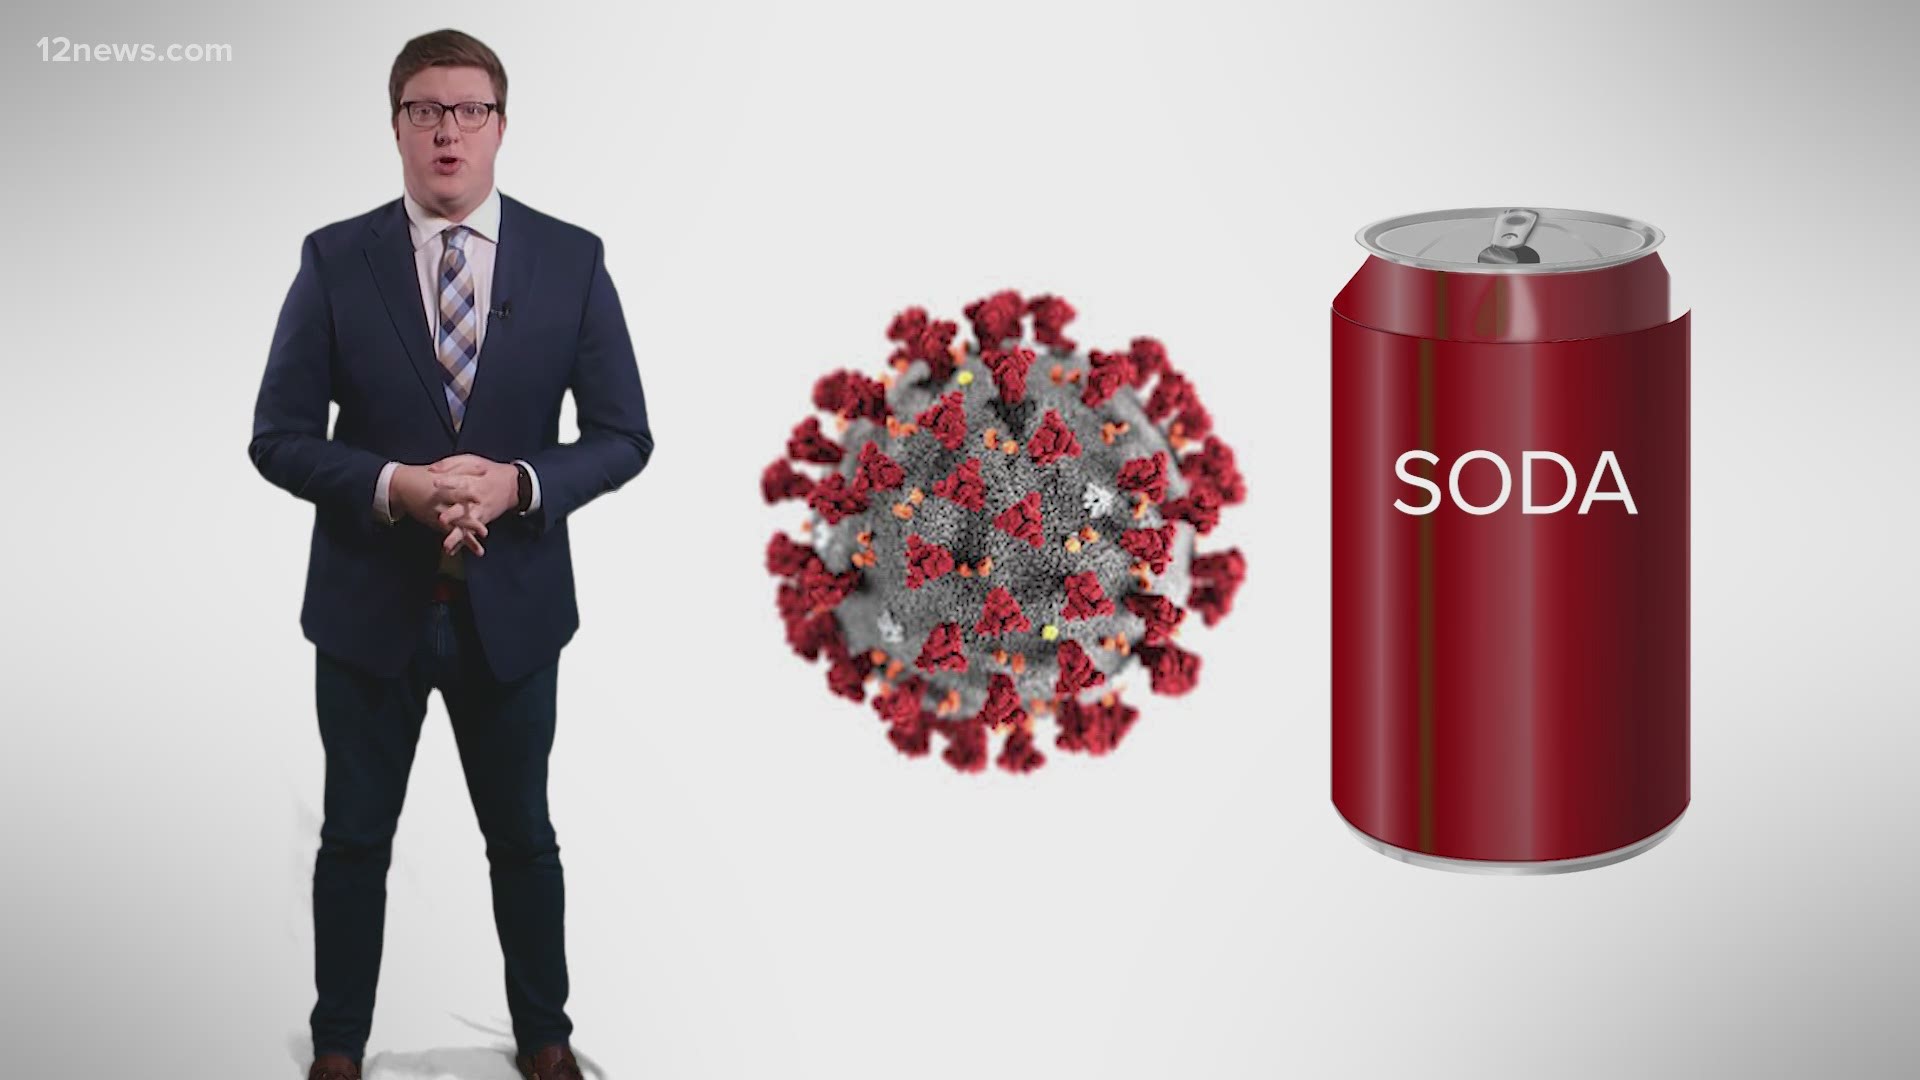 A viral post has been popping up on social media that claims all the SARS-COVID-2 particles in the world would fit into a can of soda. The Verify Team looks into it.